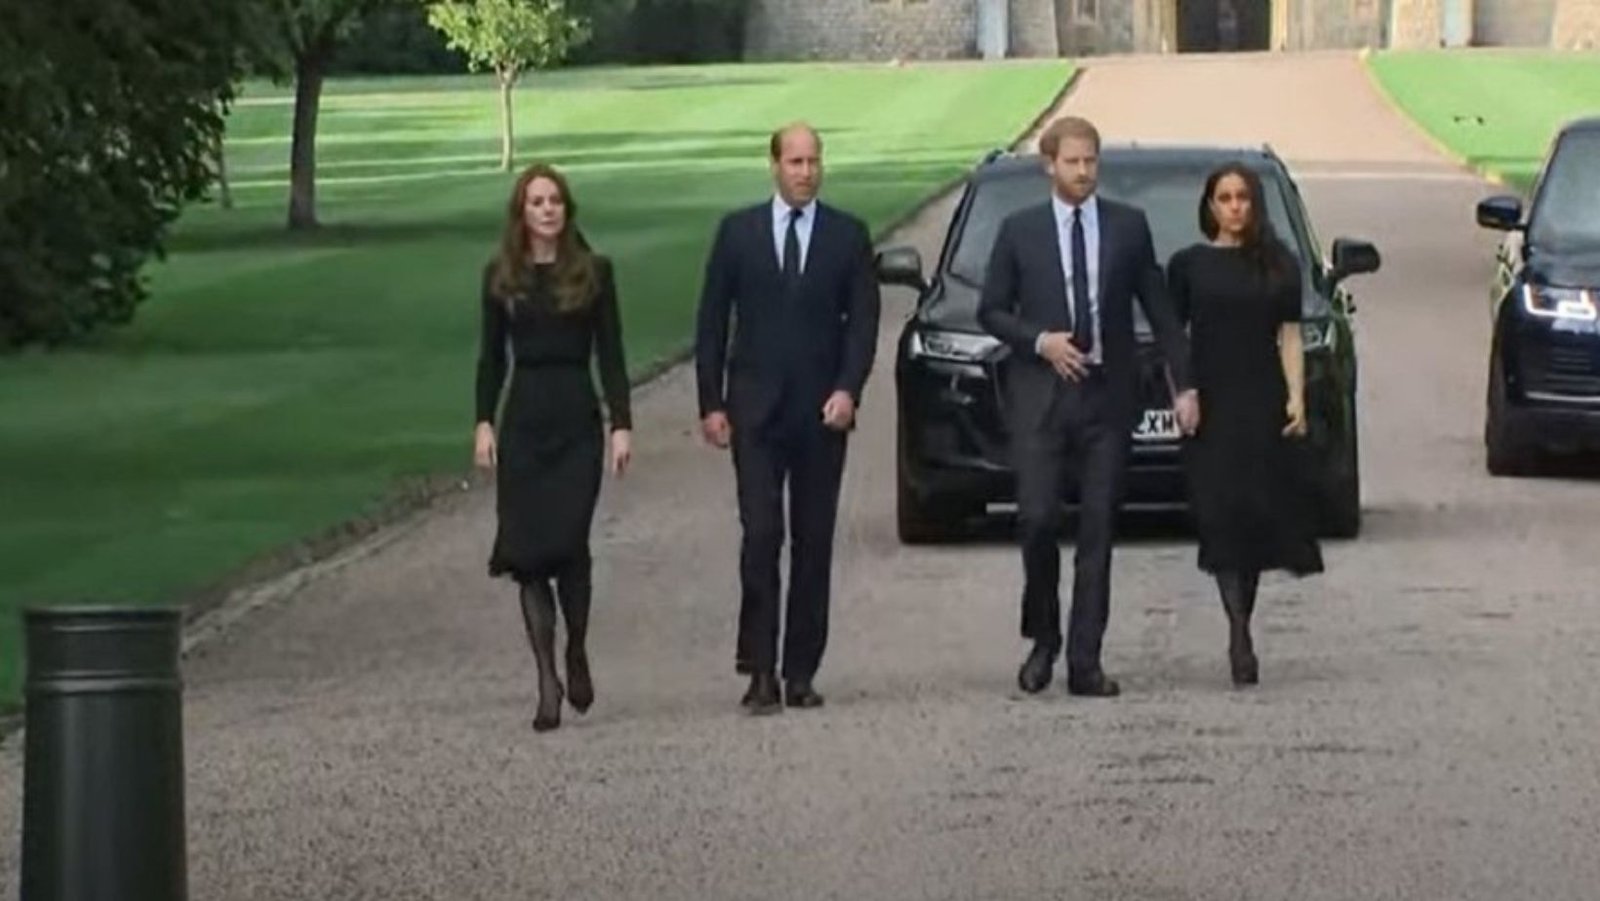 Reunion of Prince Harry and William is "just what grandmother Queen Elizabeth would want."